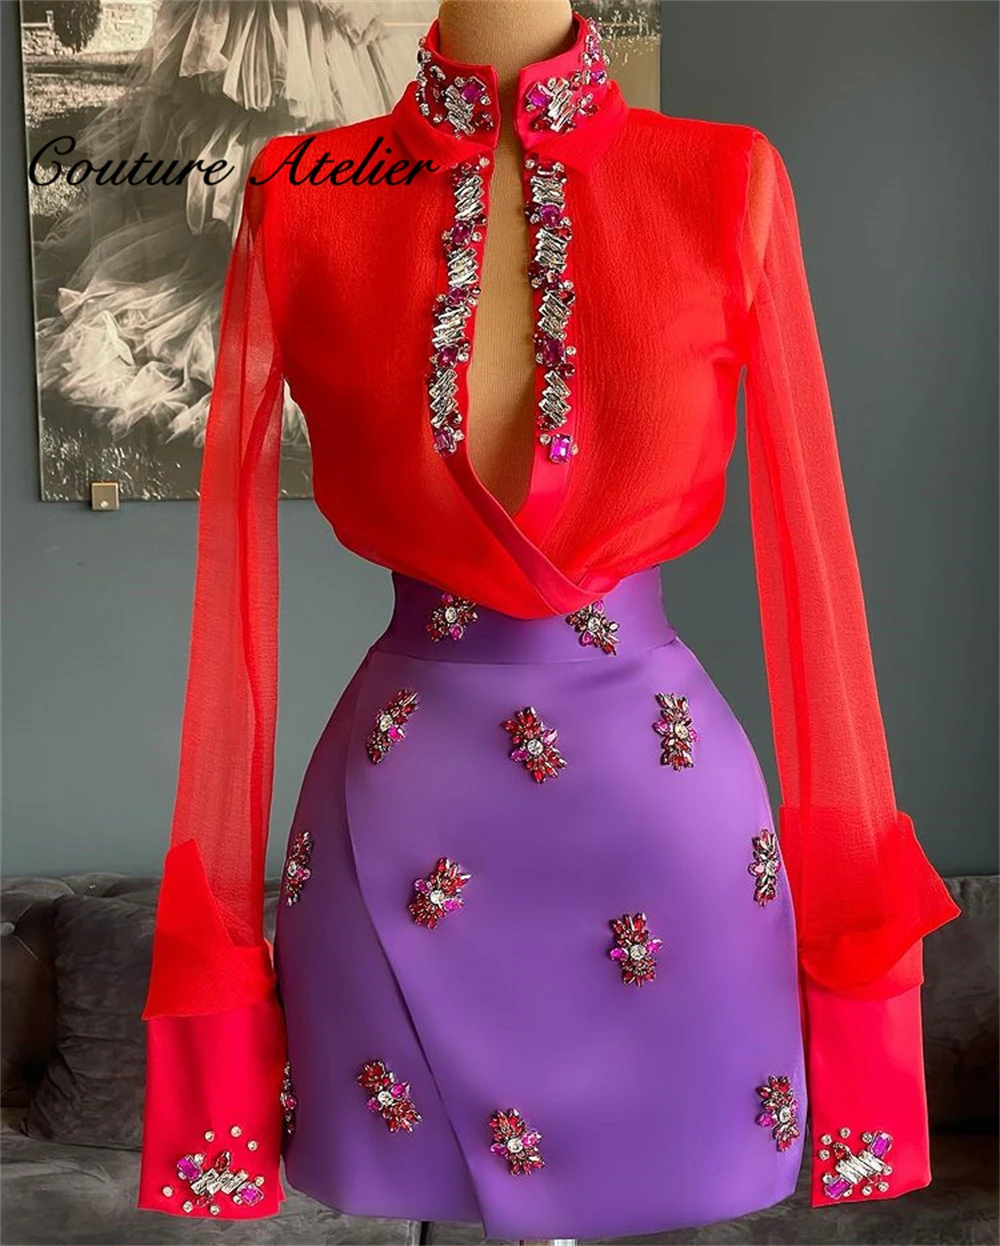 

Red And Purple Mermaid Prom Dresses Two Pieces Homecoming Dress Beaded Crystals Long Sleeve Party Gown Mini Cocktail Gowns robe